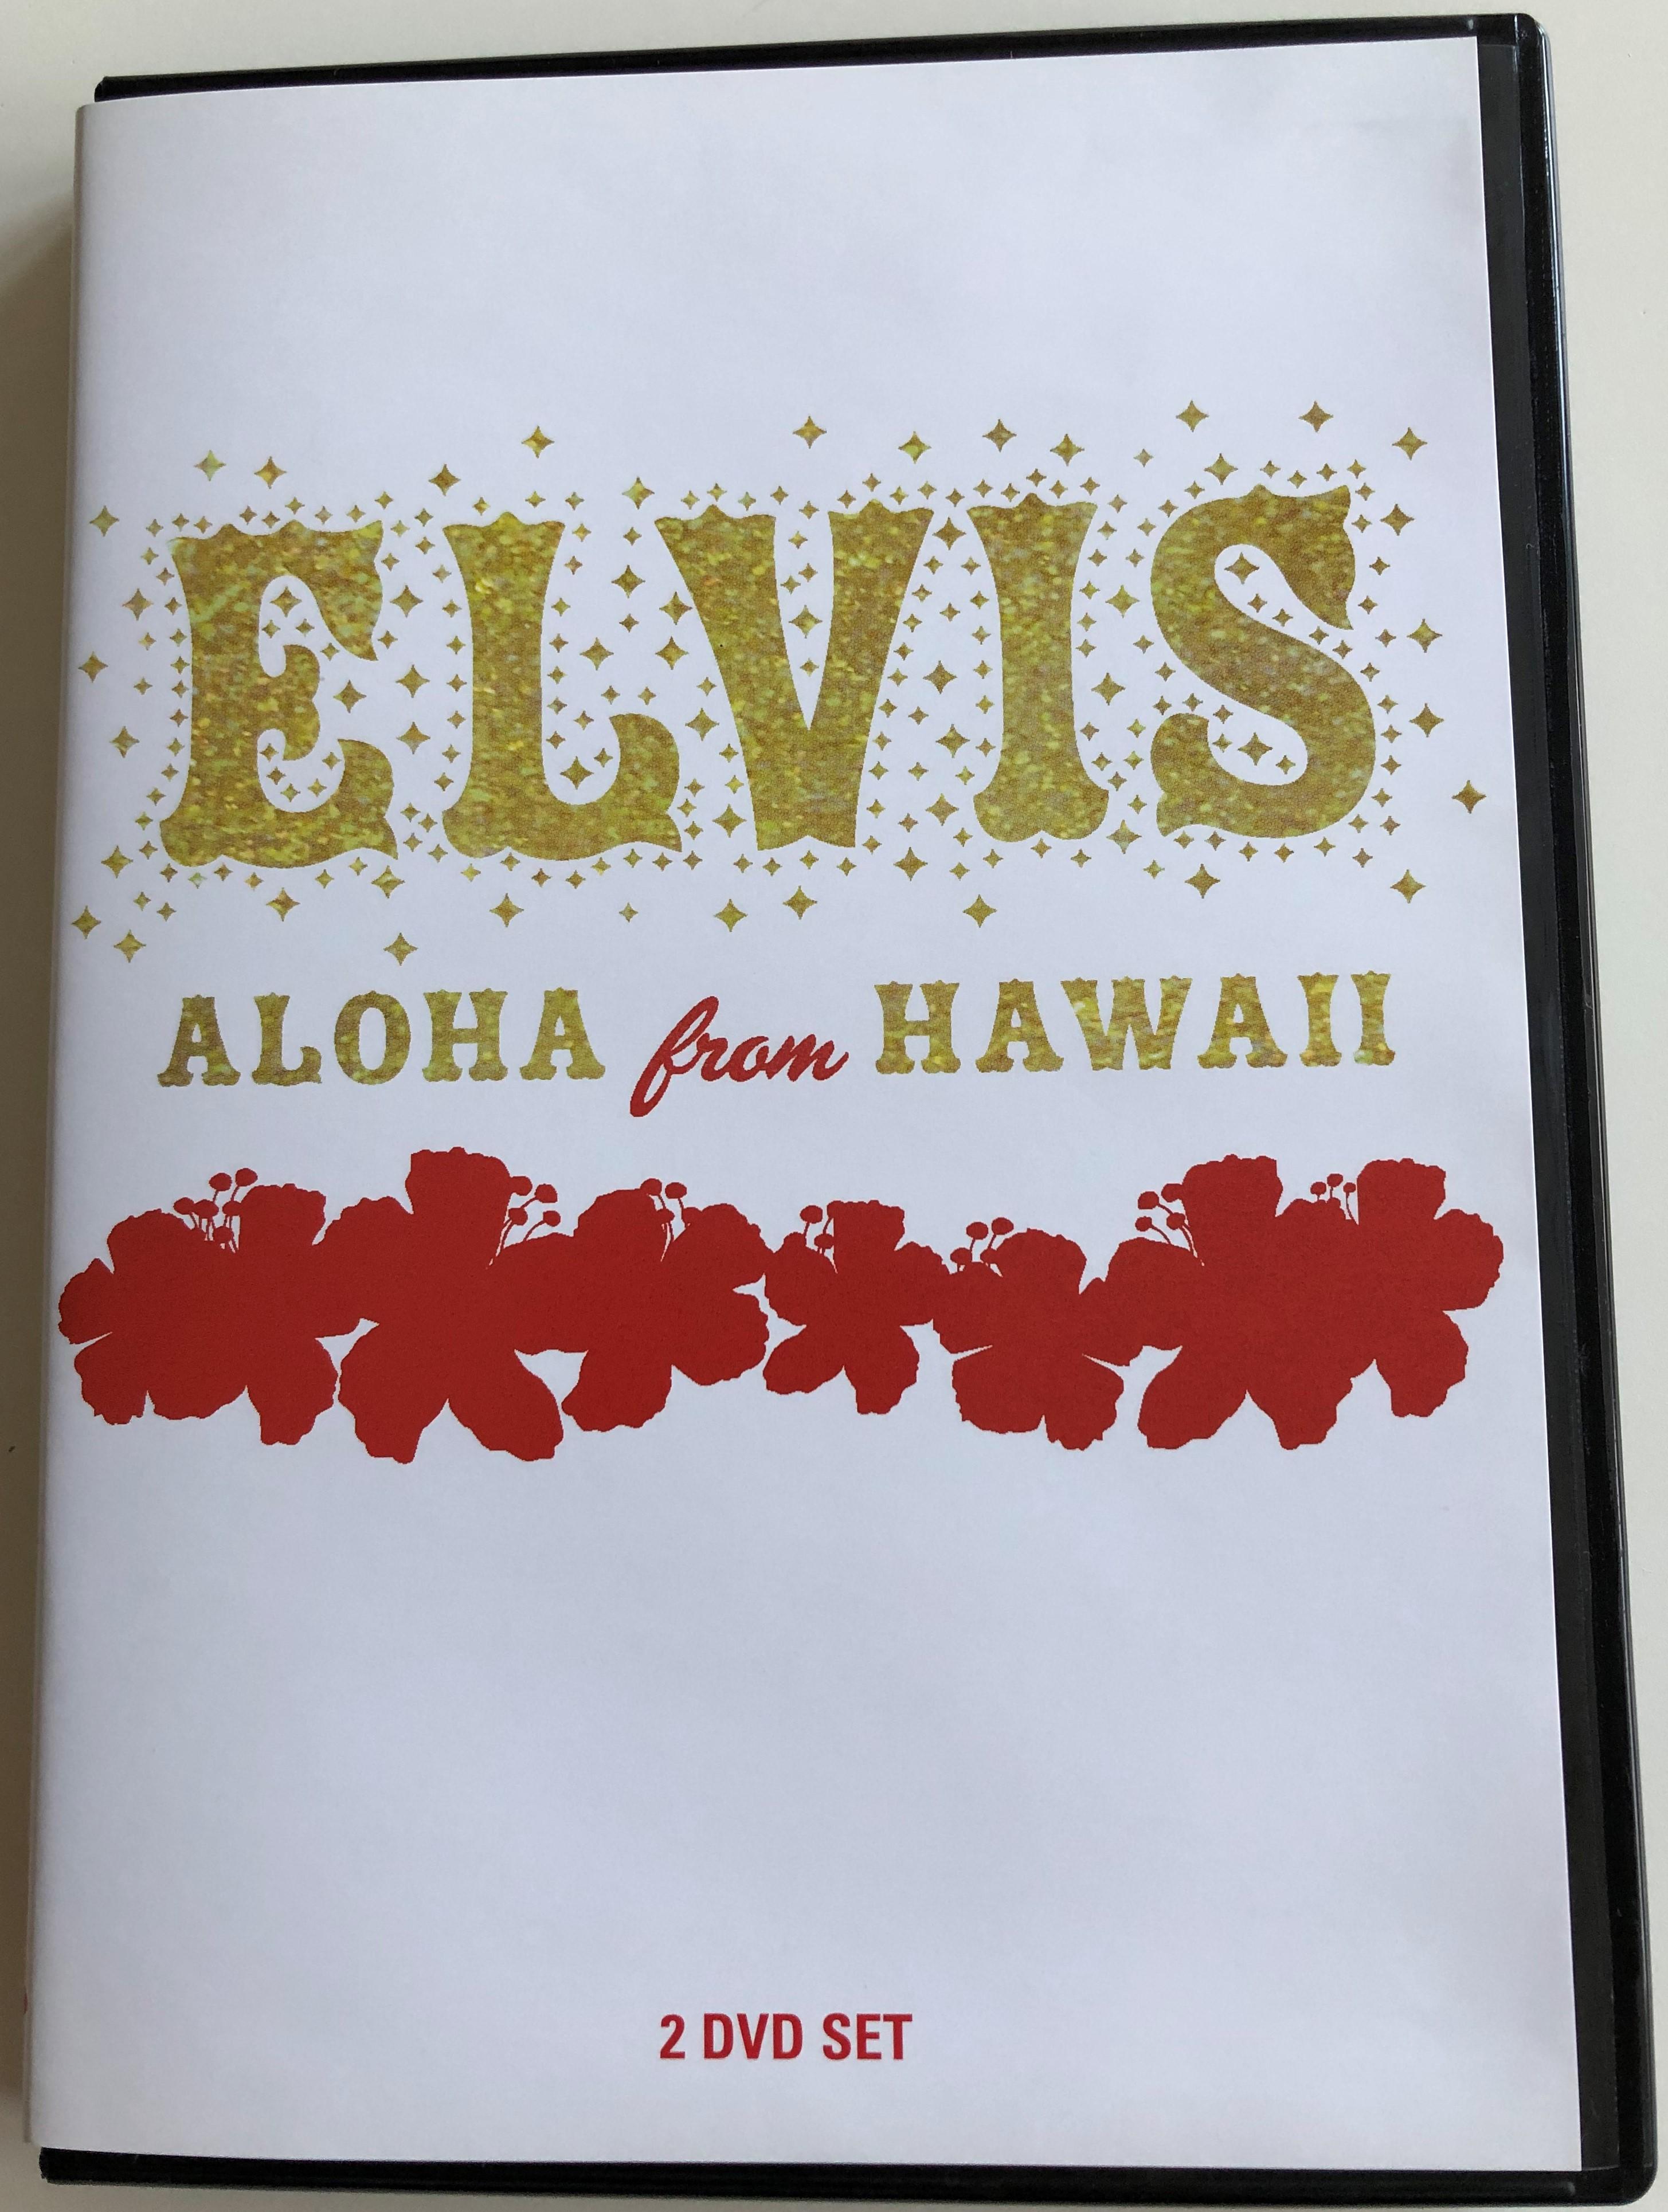 Elvis Aloha From Hawaii 2 Dvd Deluxe Edition 04 2x Dvd Set Bmg Over 4 Hours Of Video Elvis Presley Previously Unseen Material Bibleinmylanguage